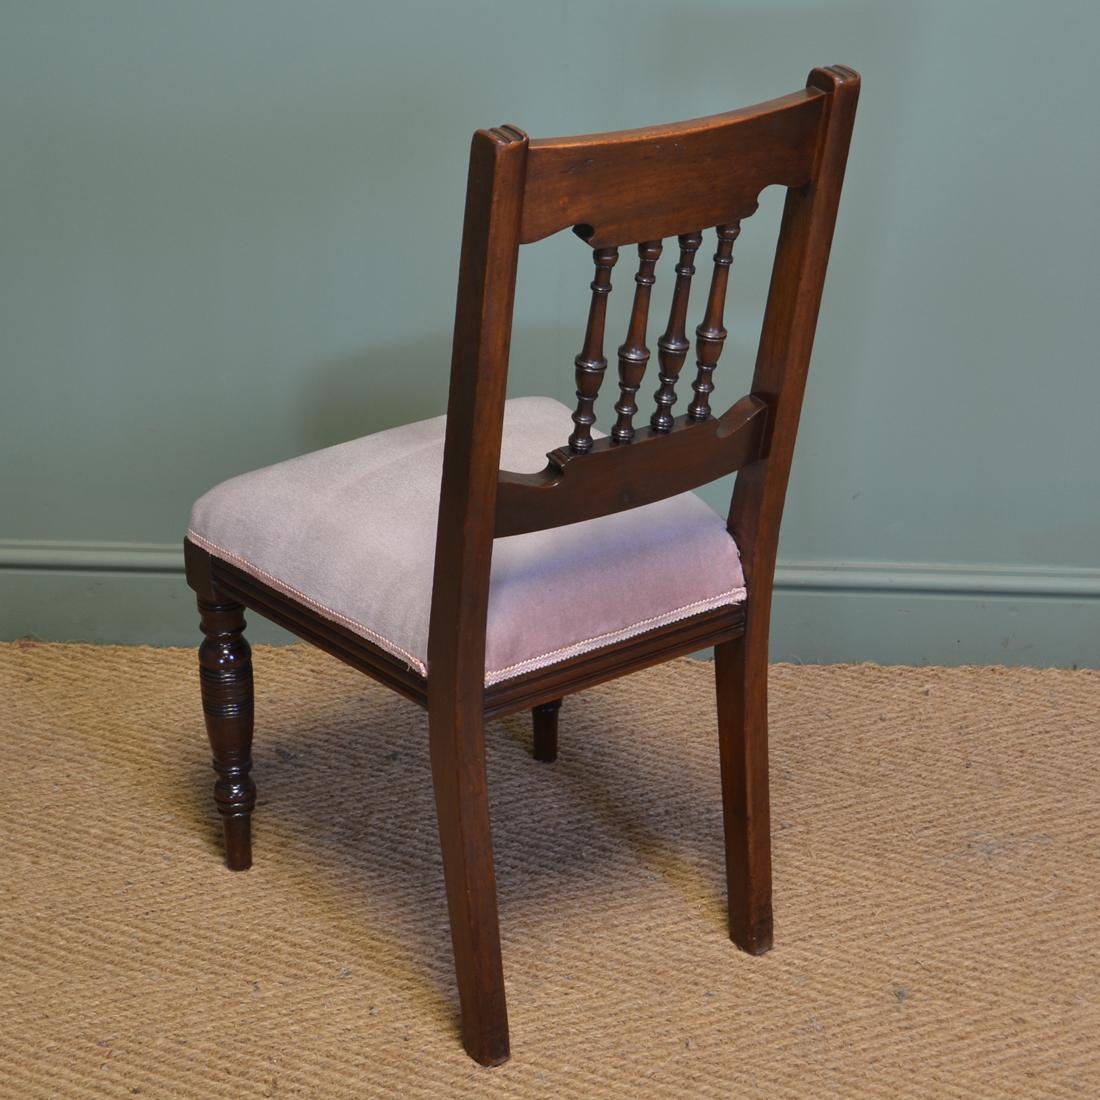 Quality set of four Victorian walnut antique dining chairs

With Arts & Crafts influences and dating from circa 1880, this quality set of chairs have curved beautifully carved backs with a central turned back support. They stand on splayed back